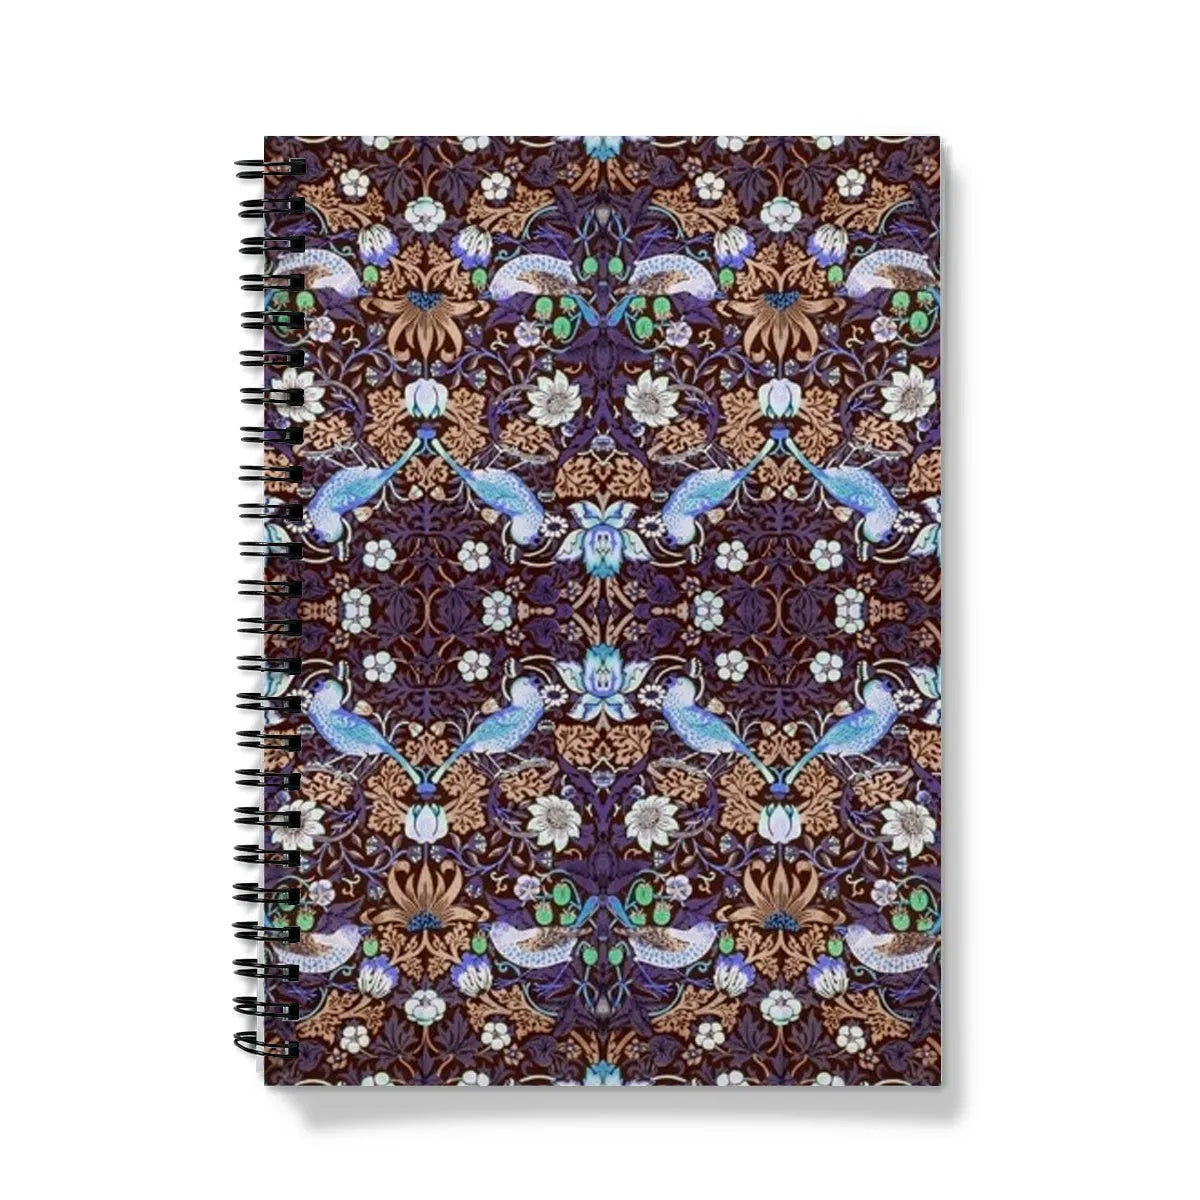 Strawberry Thief Too By William Morris Notebook - A5 - Graph Paper - Notebooks & Notepads - Aesthetic Art